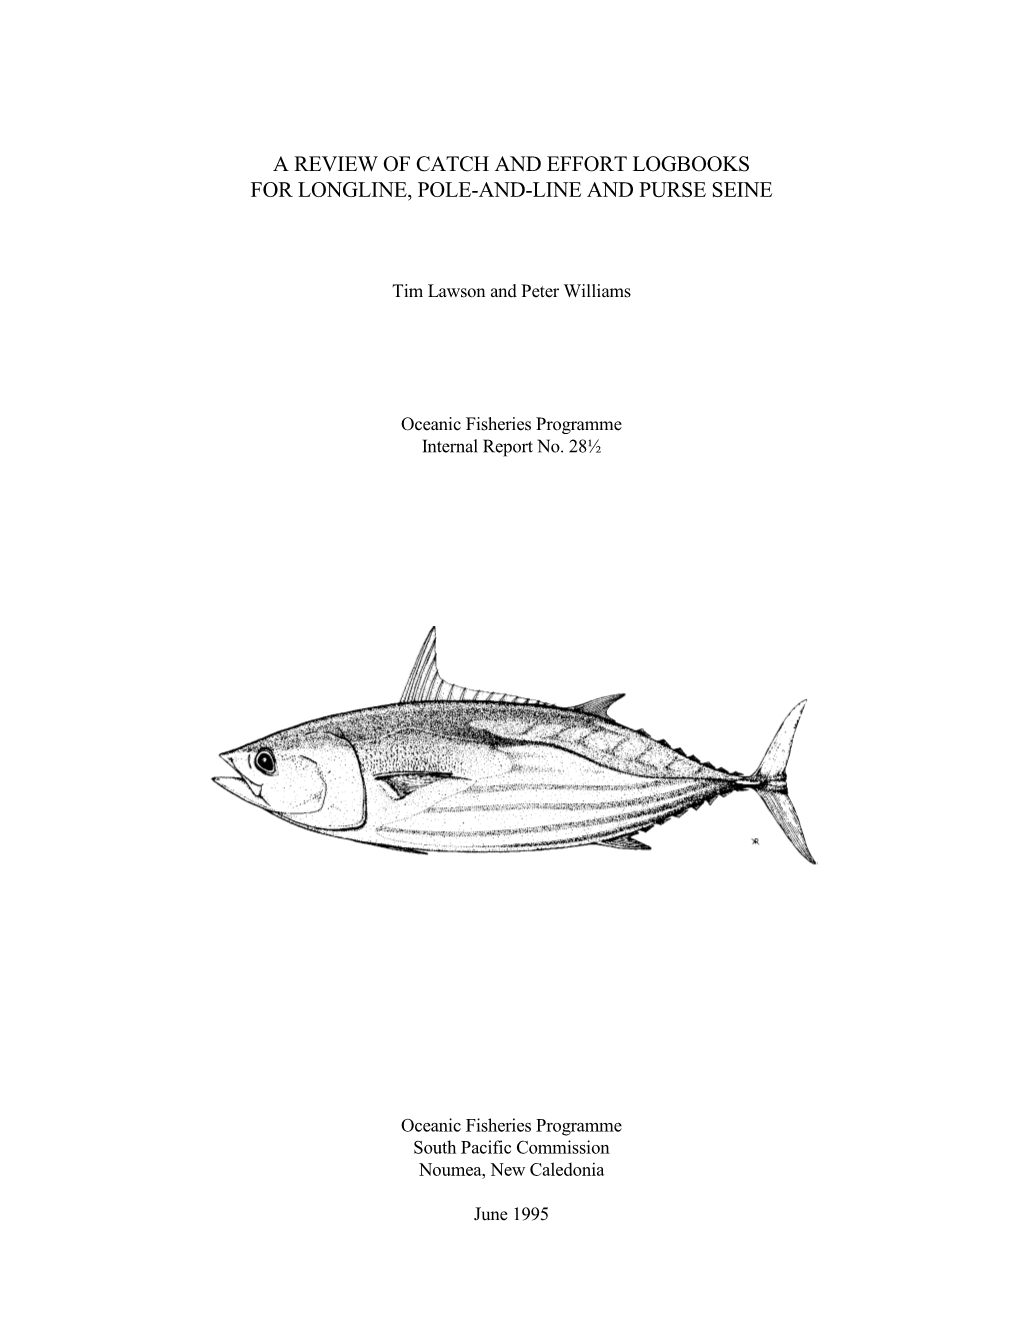 A Review of Catch and Effort Logbooks for Longline, Pole-And-Line and Purse Seine